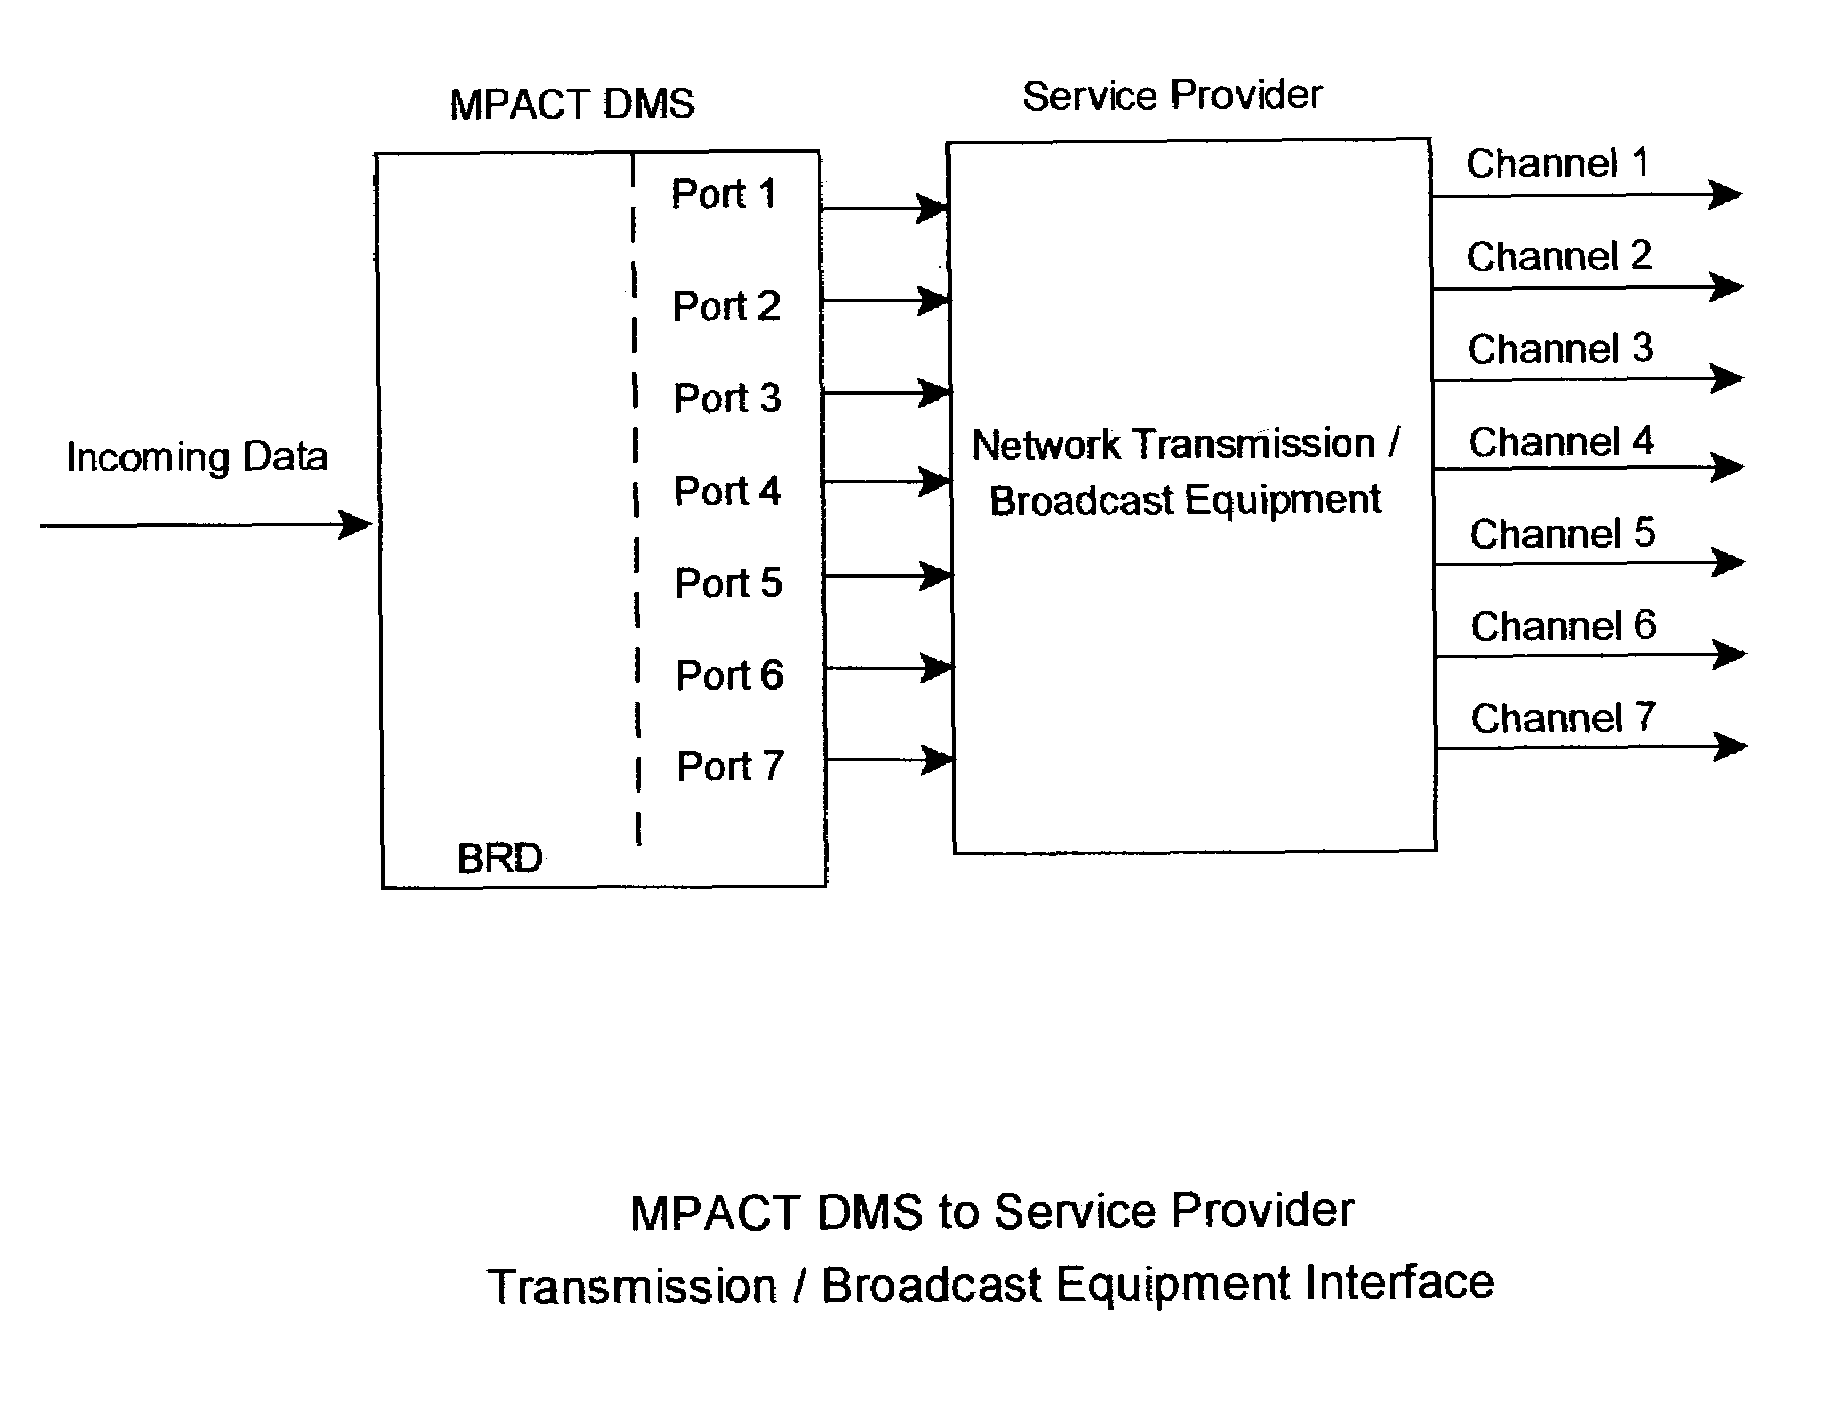 Massively parallel computer network-utilizing MPACT and multipoint parallel server (MPAS) technologies